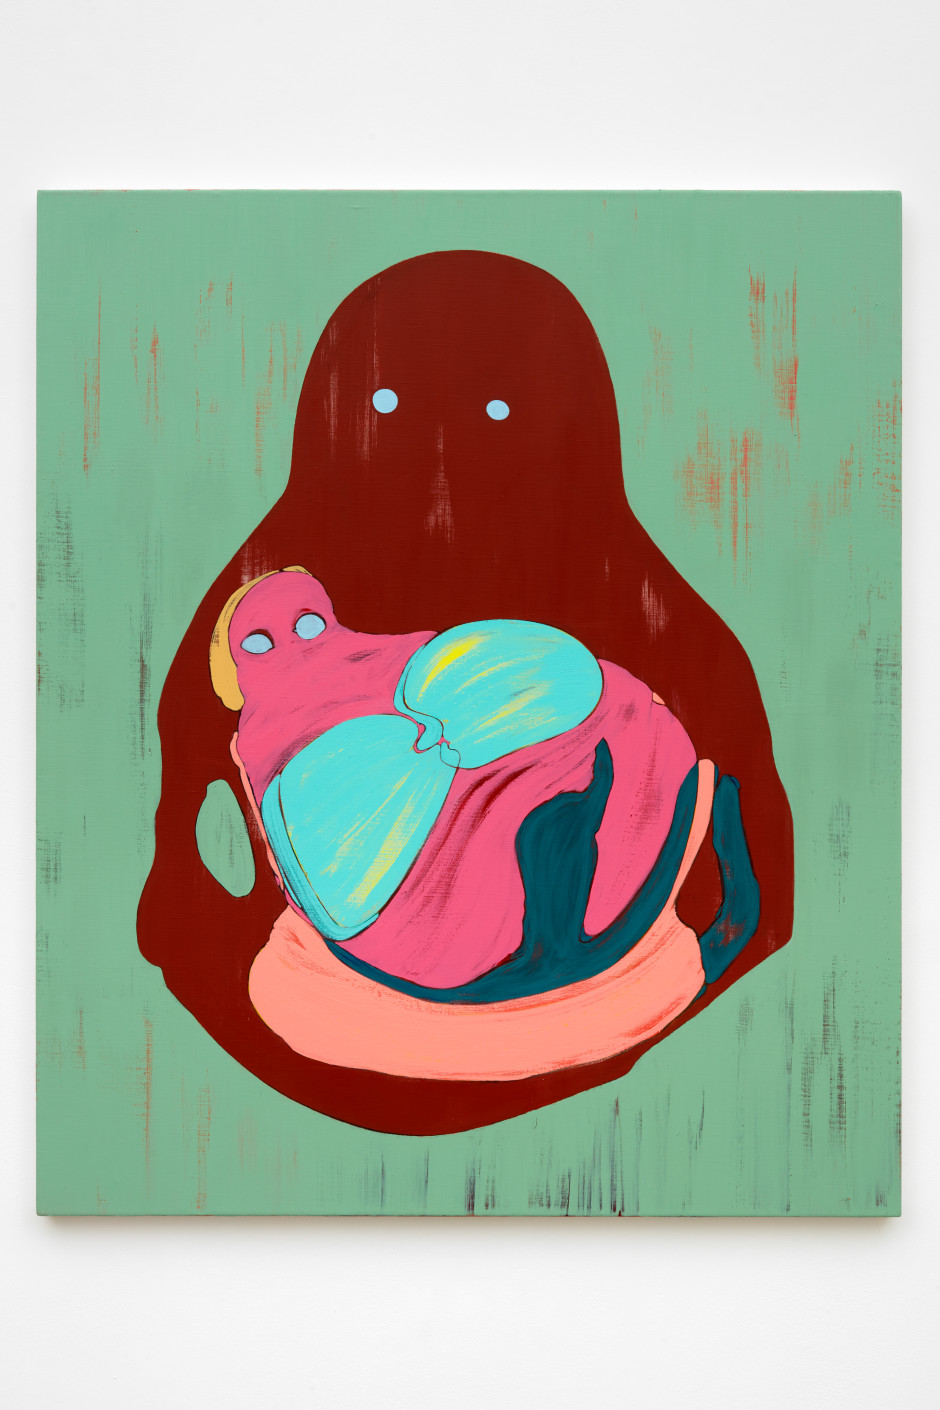 Mother and baby, 2021  acrylic on linen  138.2 x 114.9 x 3.8 cm 54 ⅜ x 45 ¼ x 1 ½ in